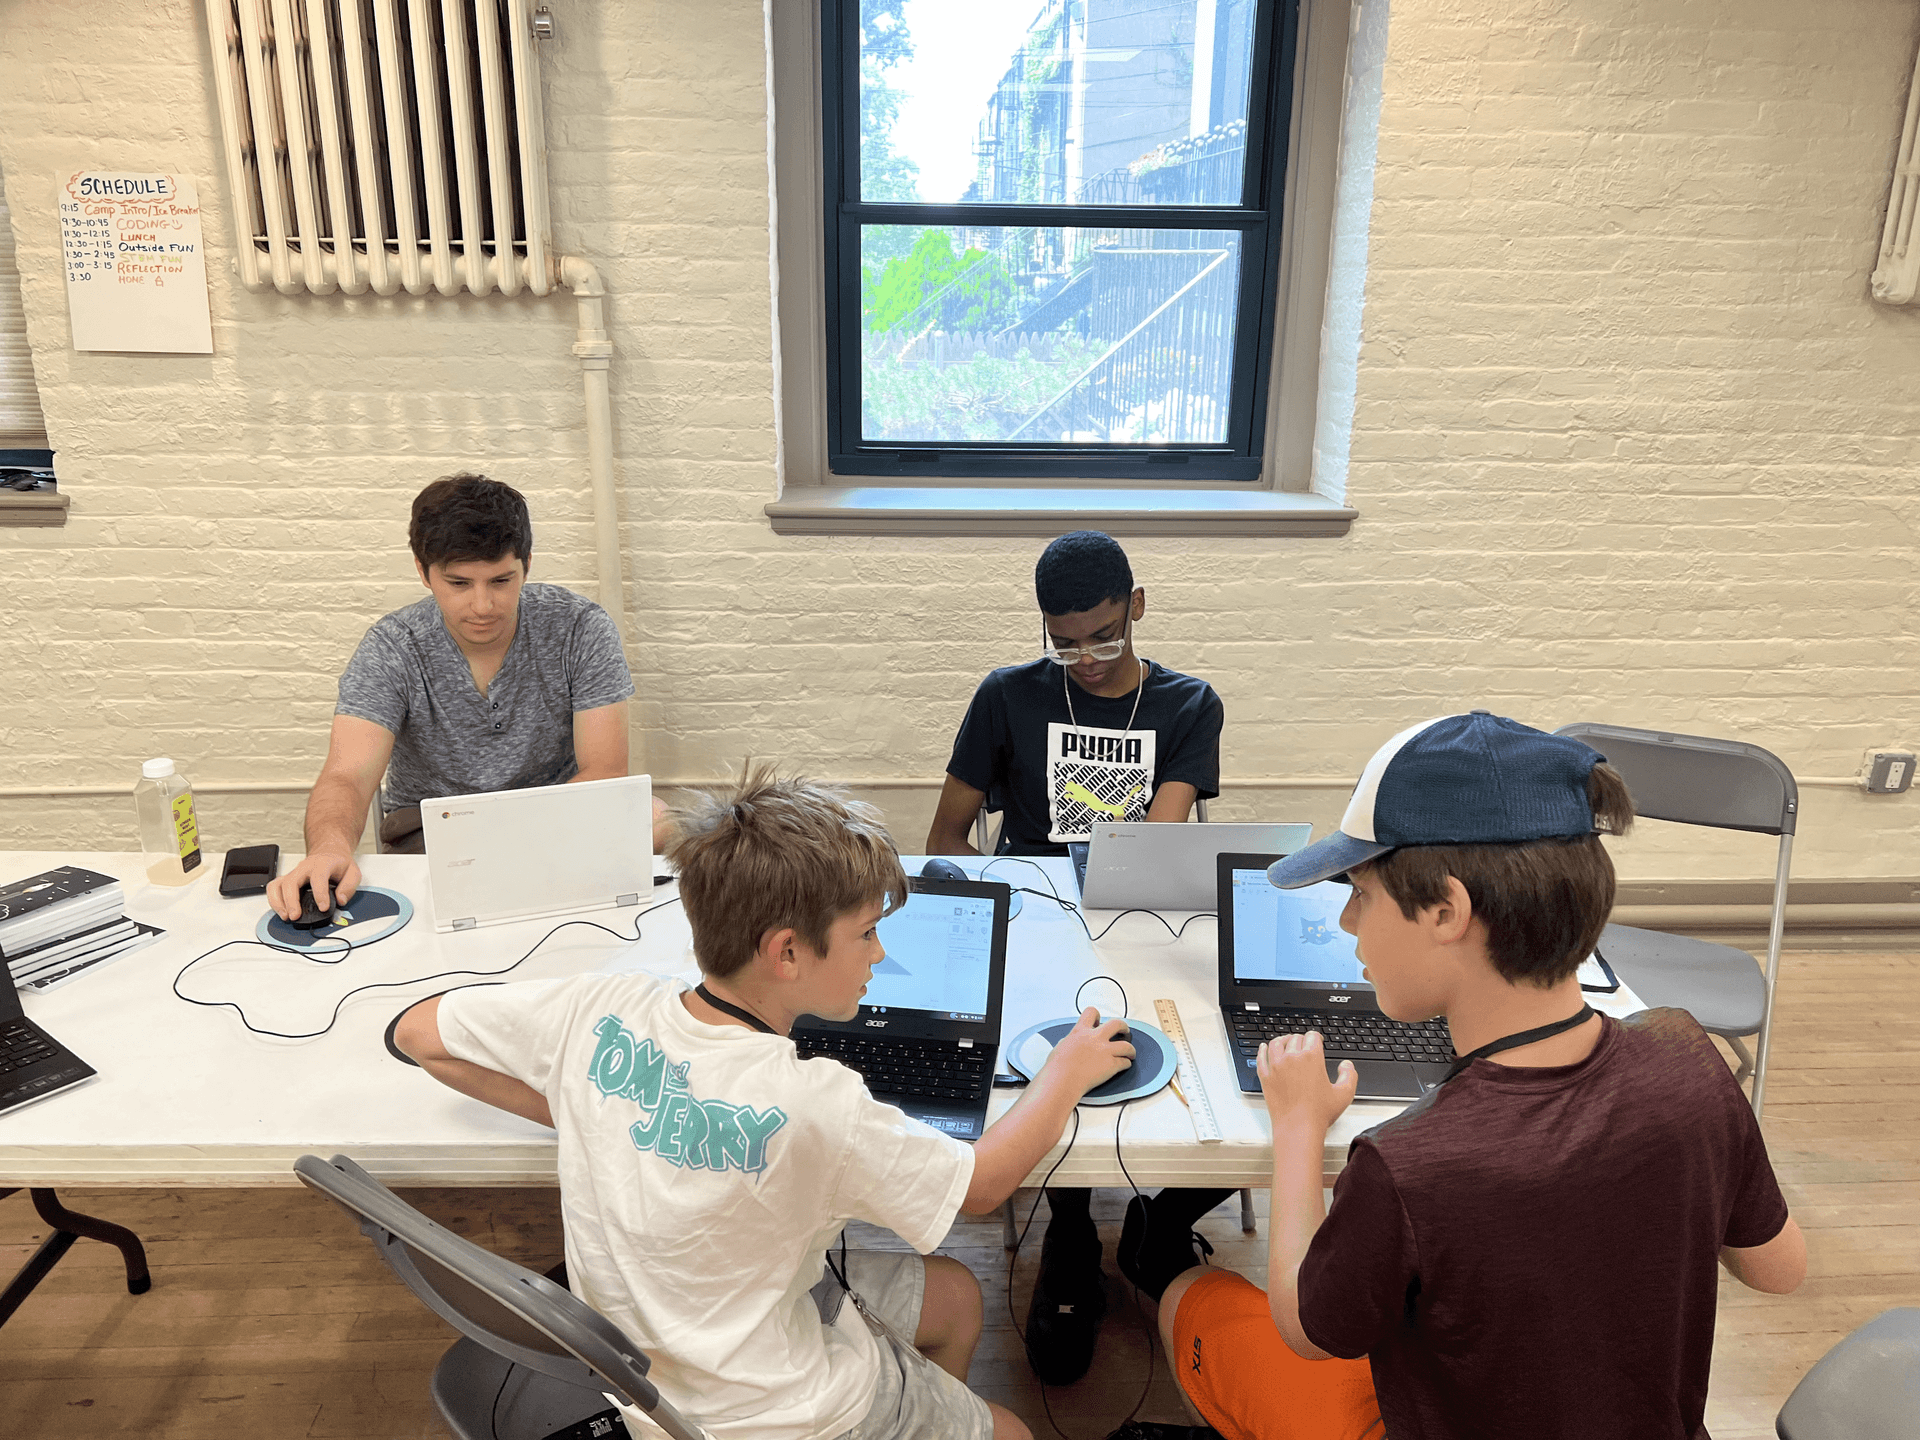 Boys coding together at a table